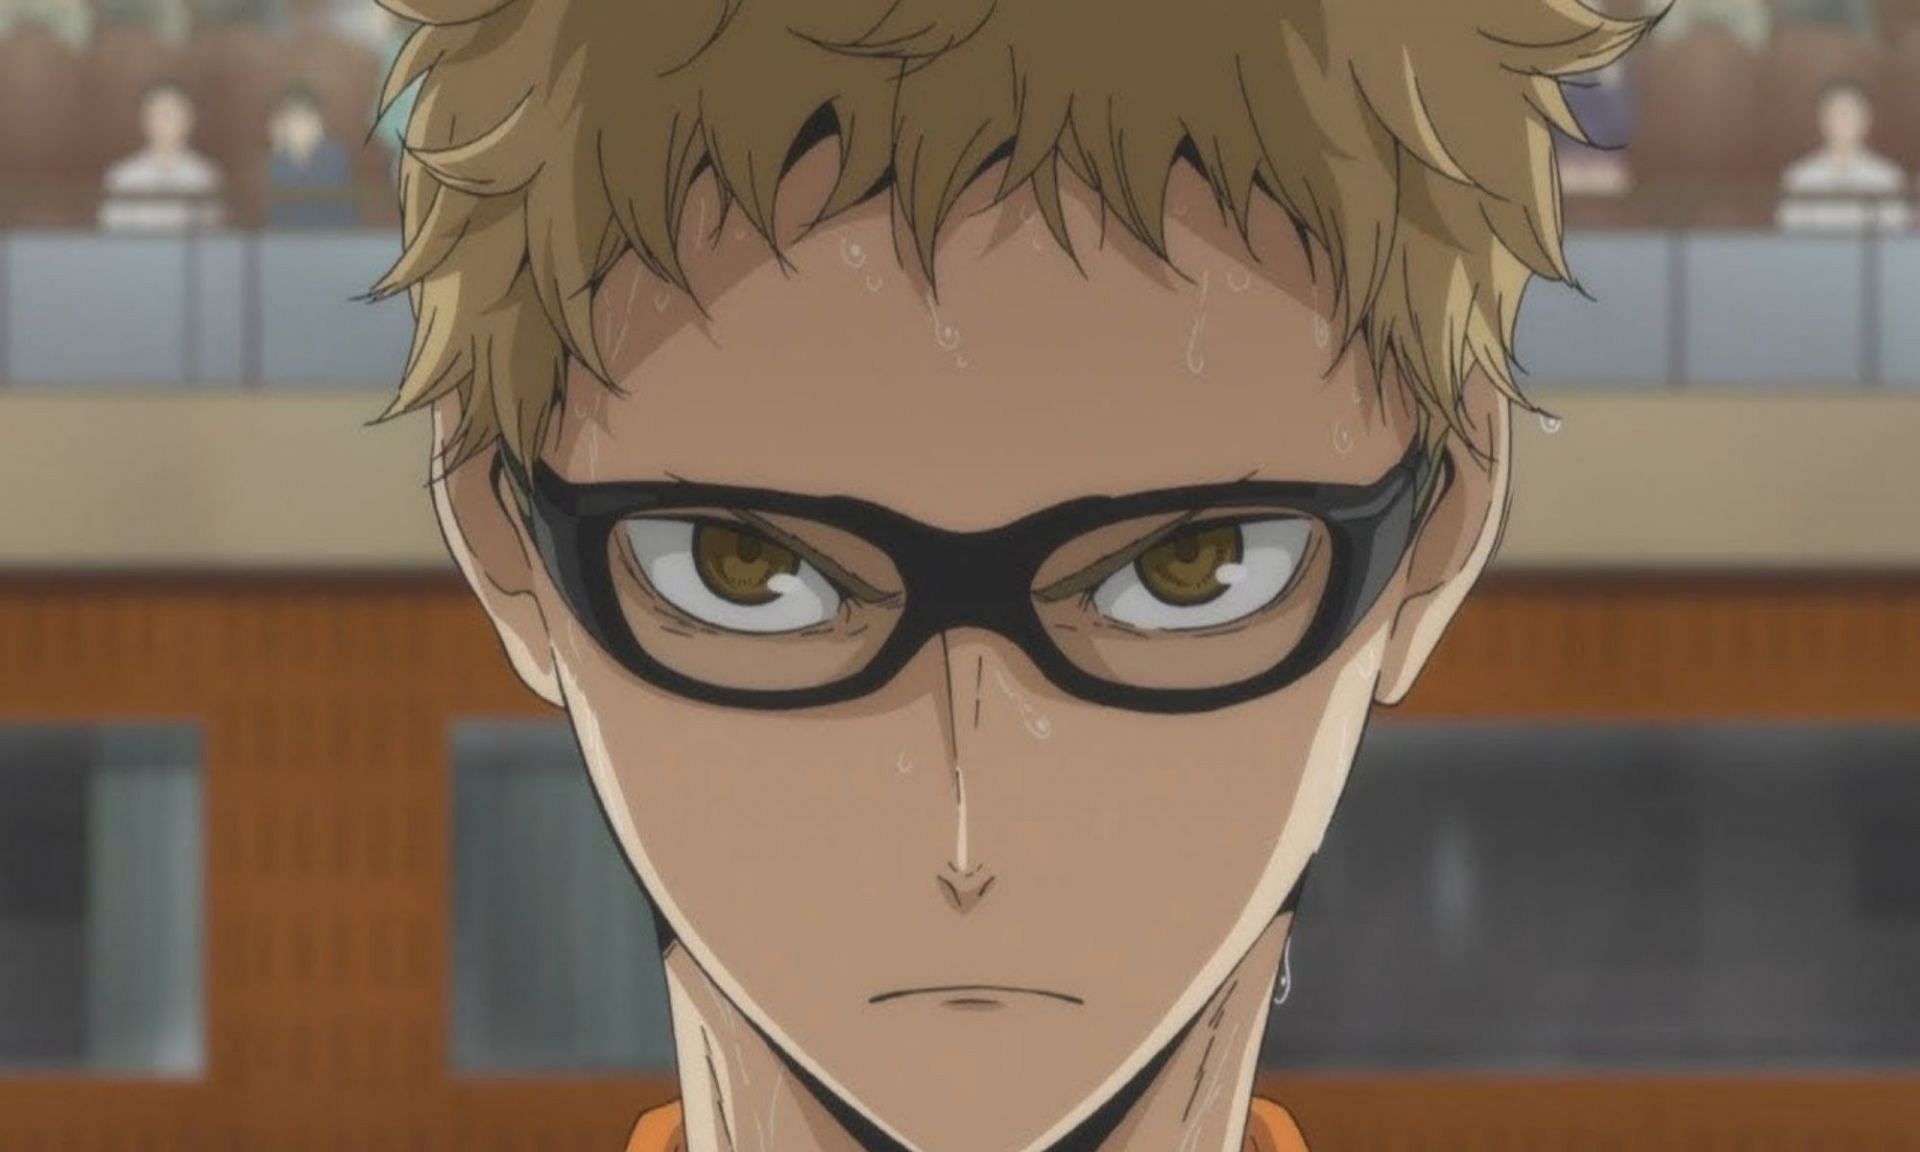 10 most talented spikers in Haikyuu!!, ranked